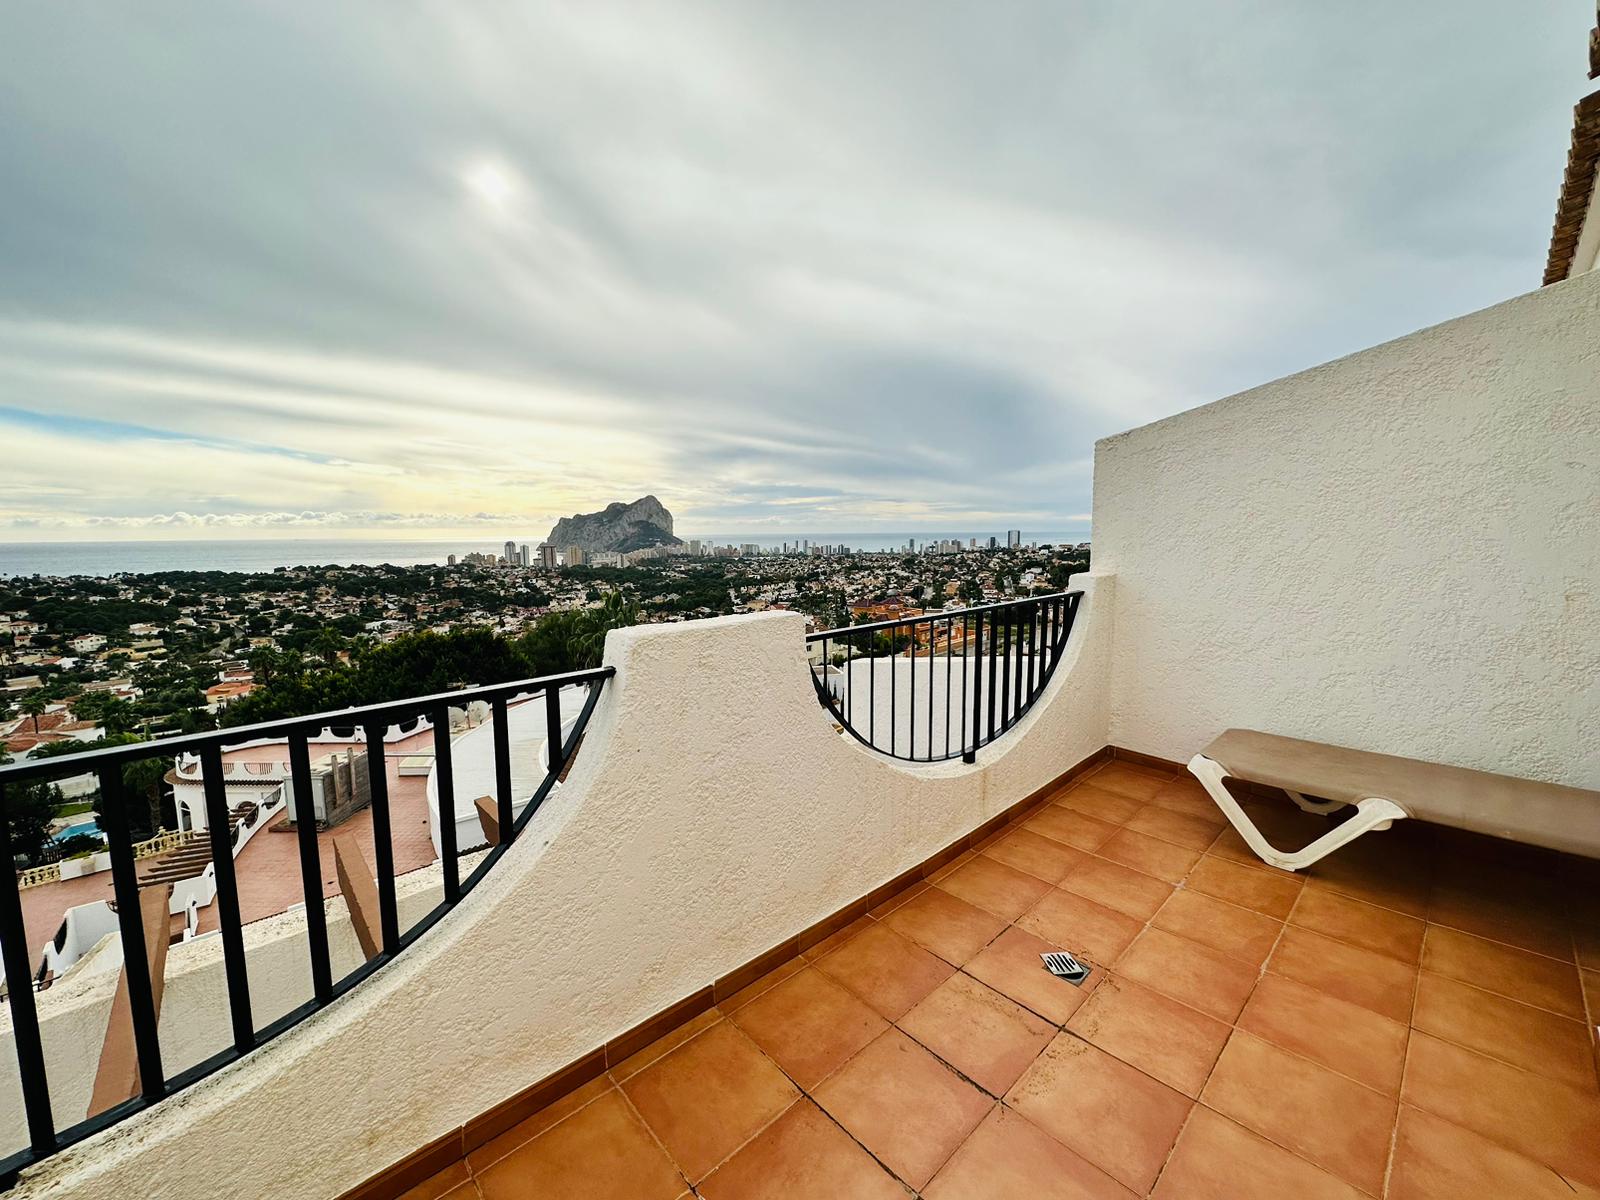 Bungalow very close to the center of Calpe with communal pool.